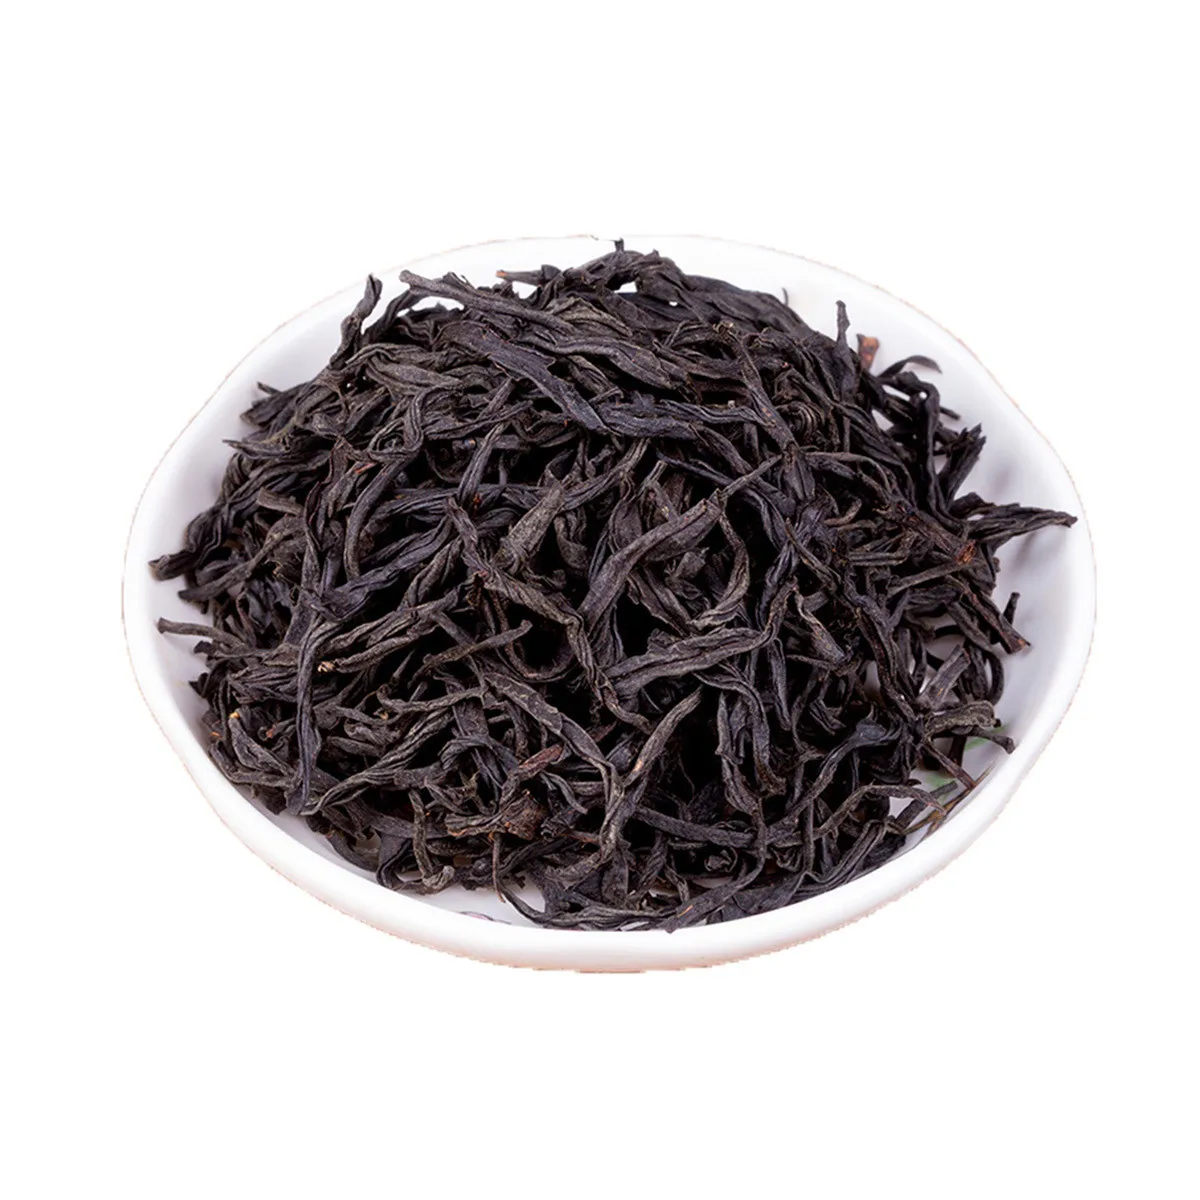 

Organic Smoky Lapsang Souchong Top Smoked China Black Tea Health Care New Cooked Tea Factory Direct Sales100g